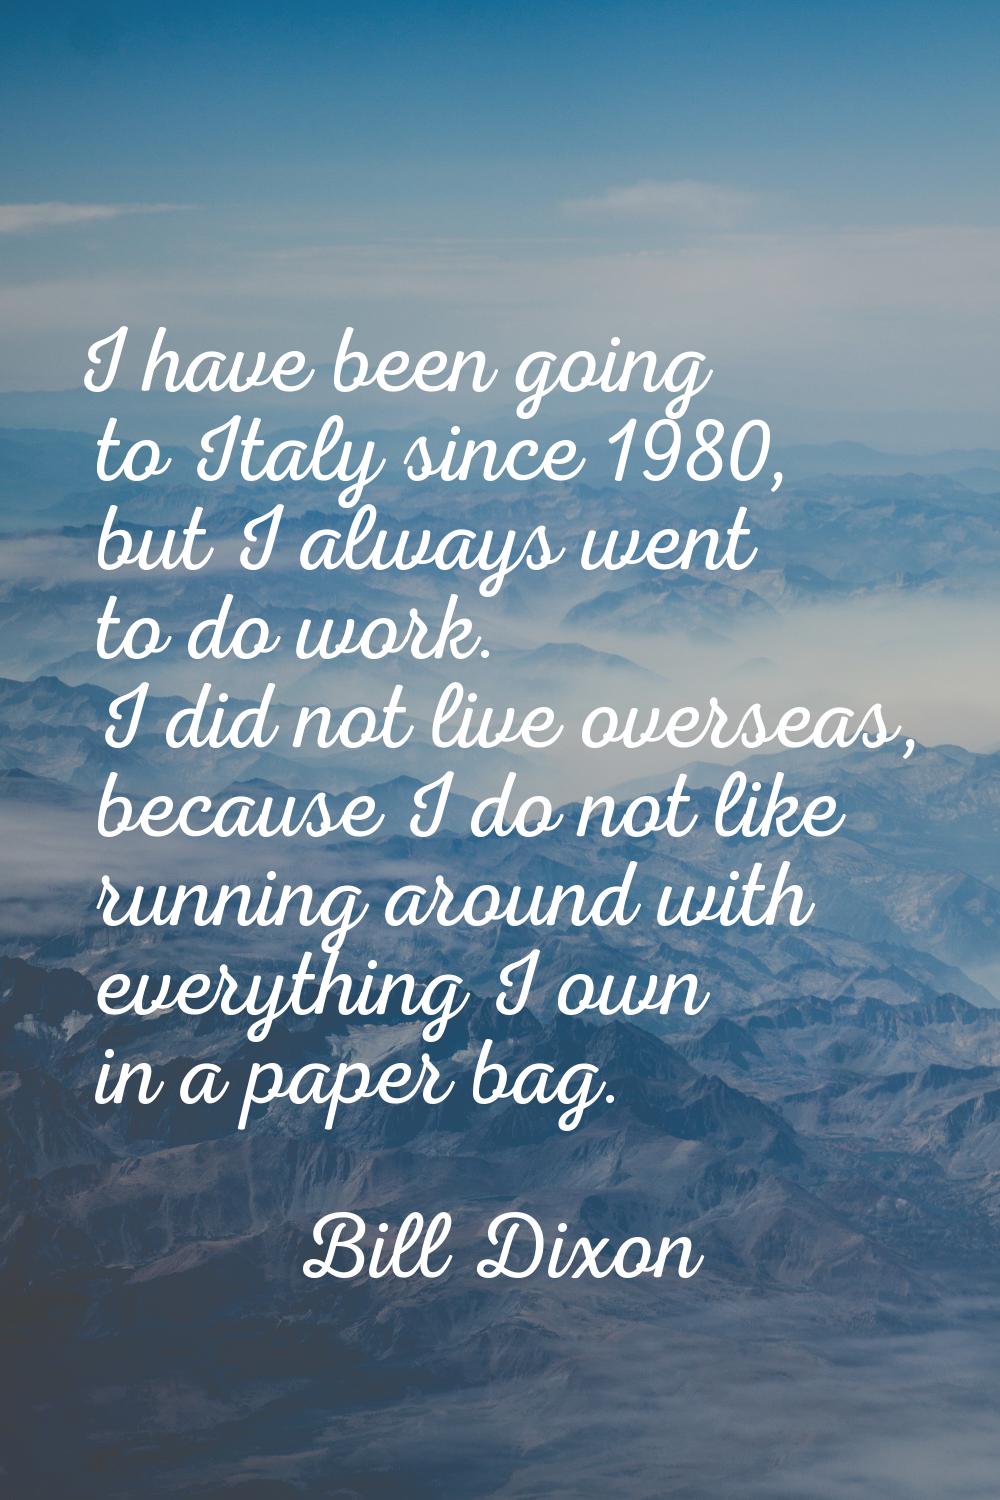 I have been going to Italy since 1980, but I always went to do work. I did not live overseas, becau